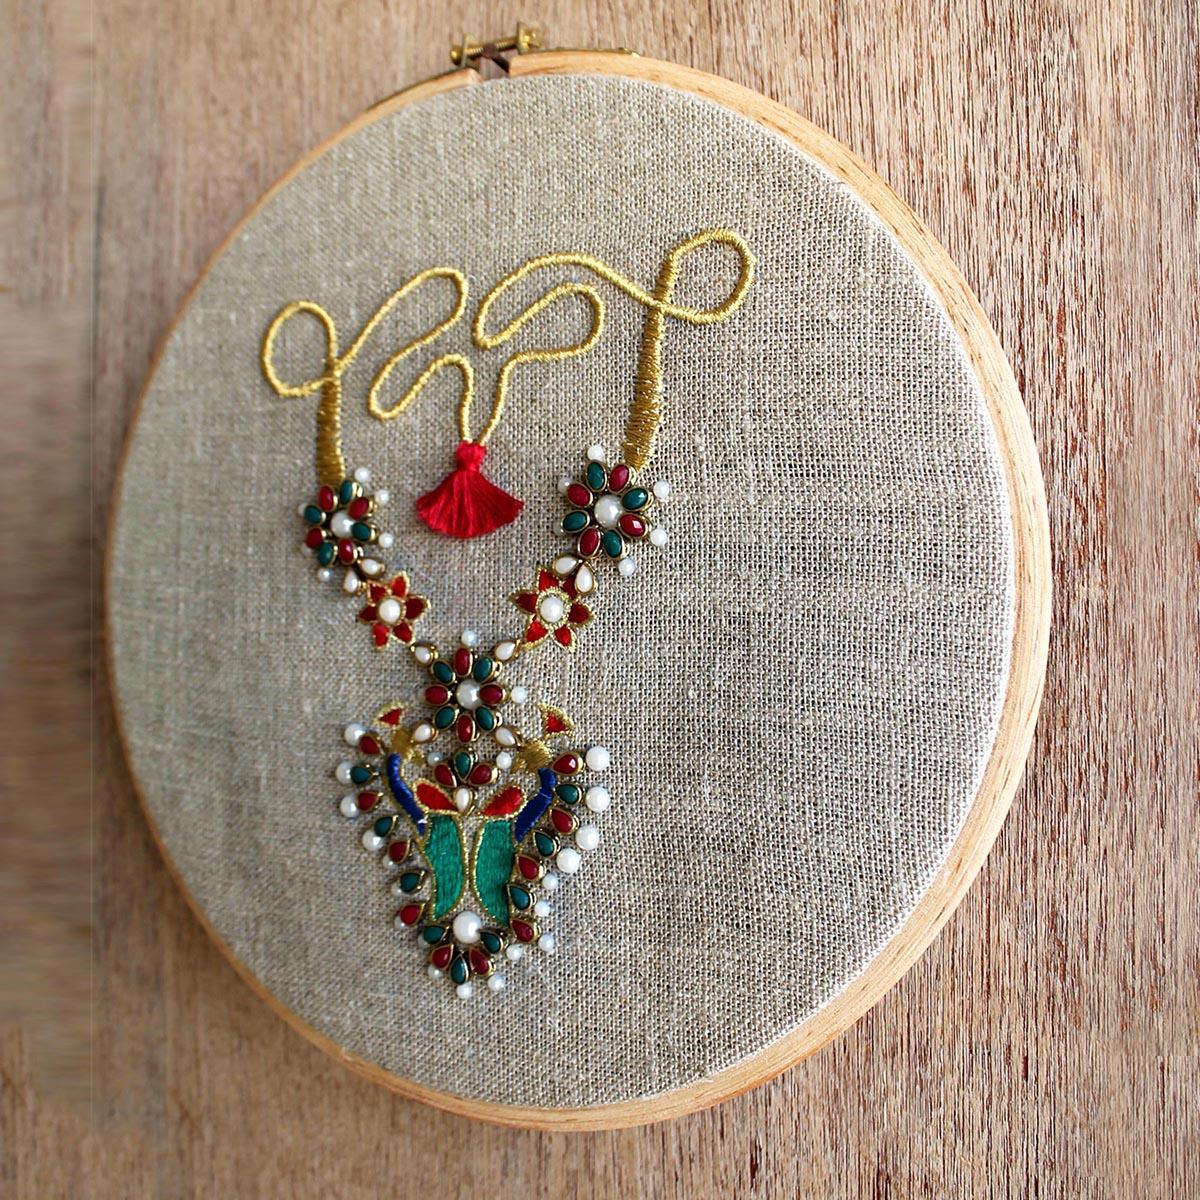 Necklace Hoop art, Indian Jewellery embroidery, linen with colors, wall decor, size 10"